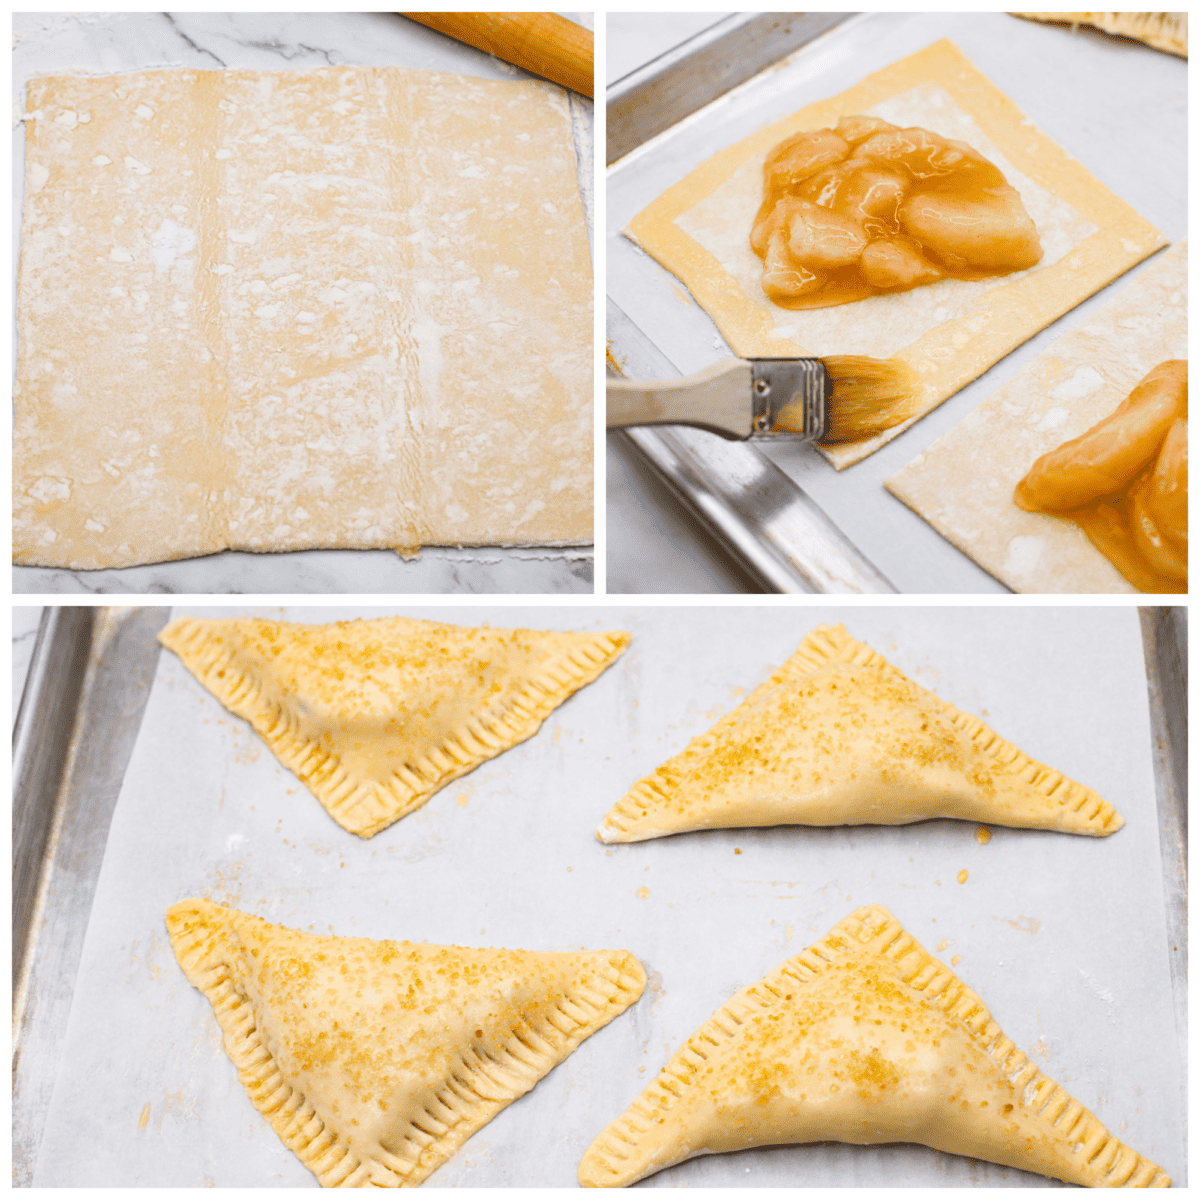 3 pictures showing how to assemble apple turnovers. 